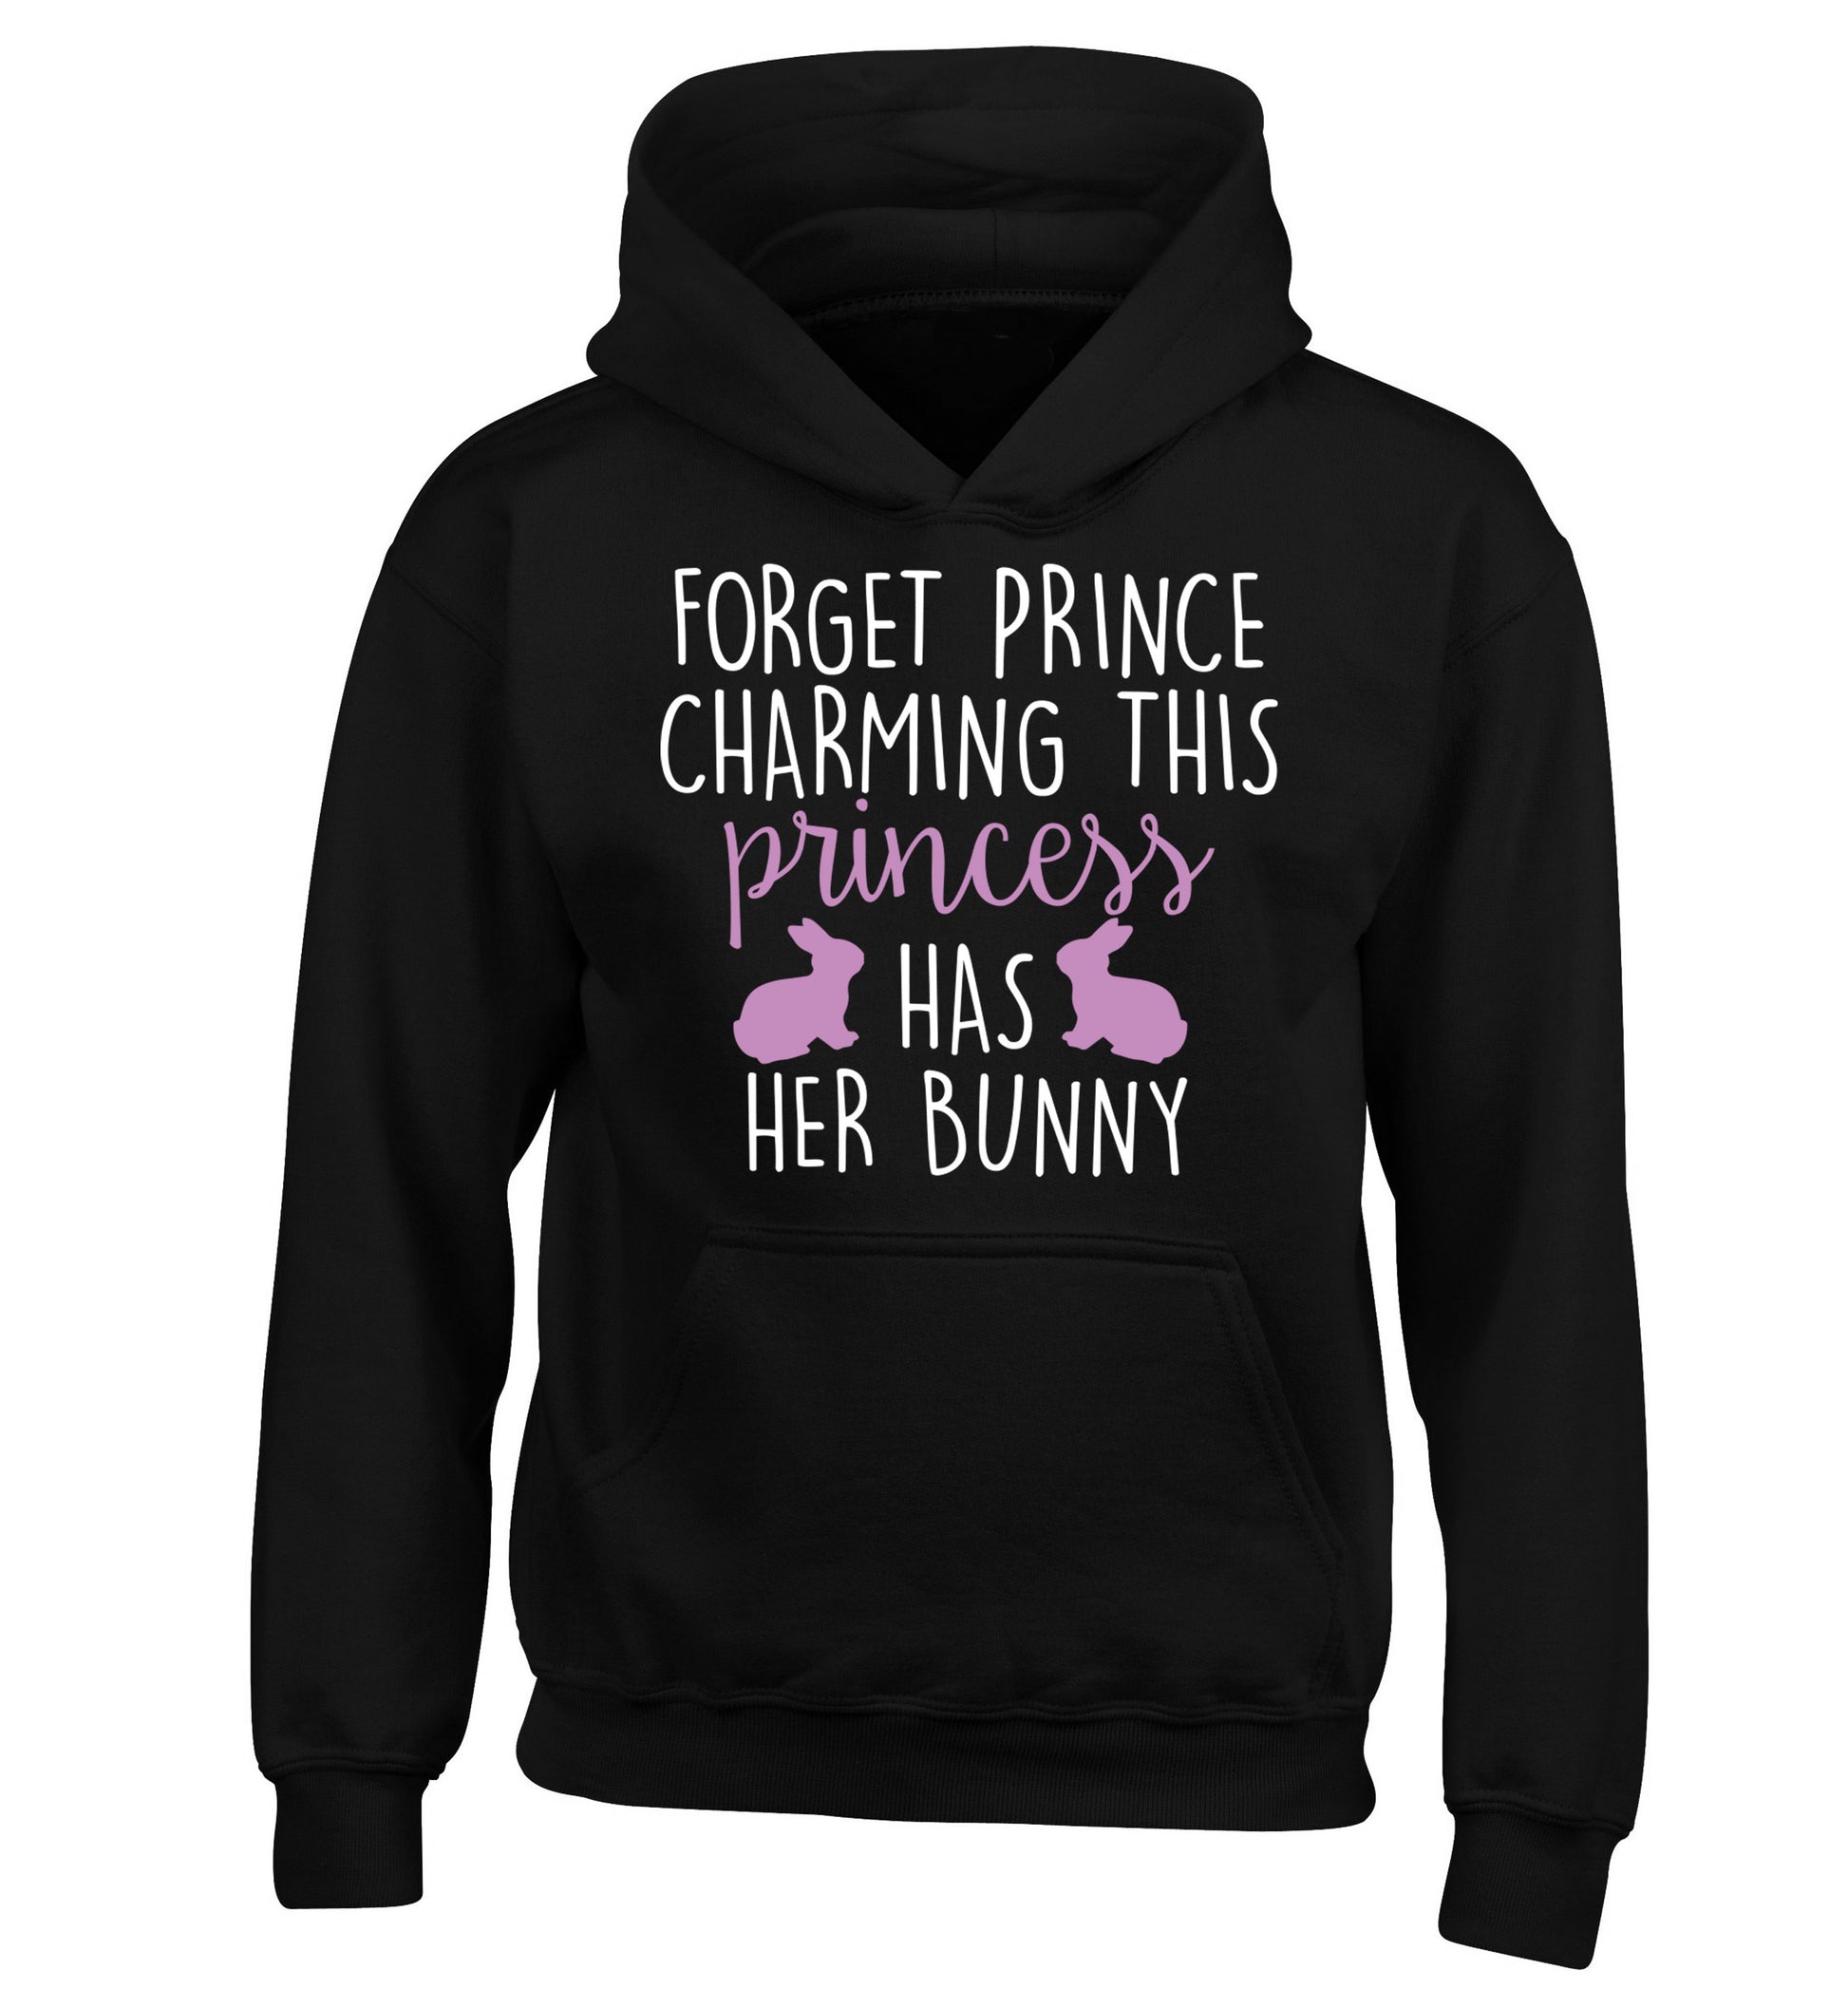 Forget prince charming this princess has her bunny children's black hoodie 12-14 Years